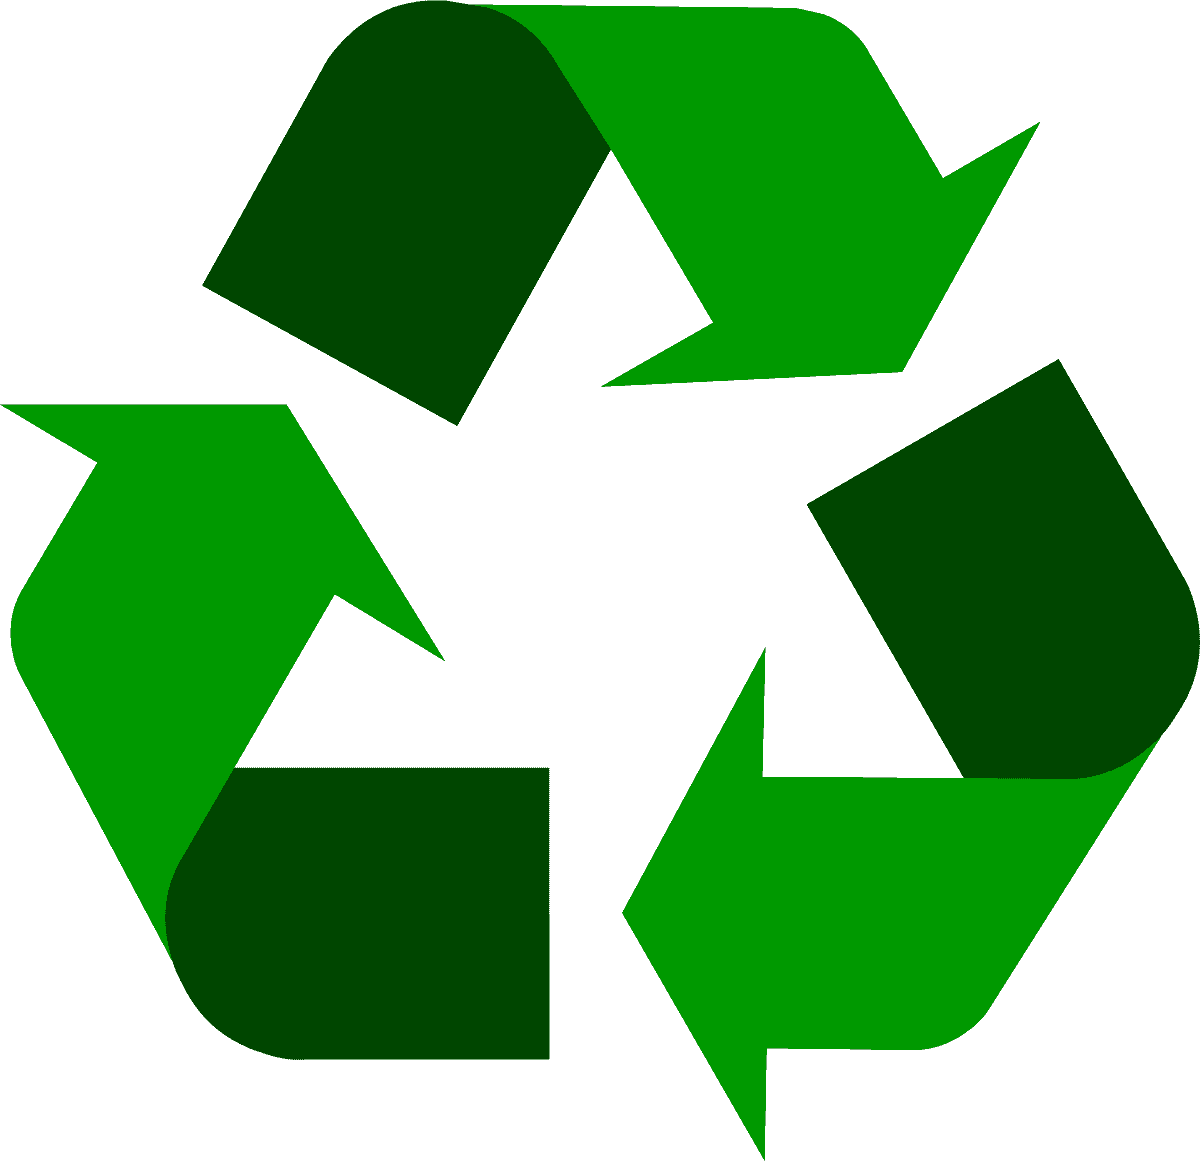 recycling-symbol-icon-twotone-dark-green.png